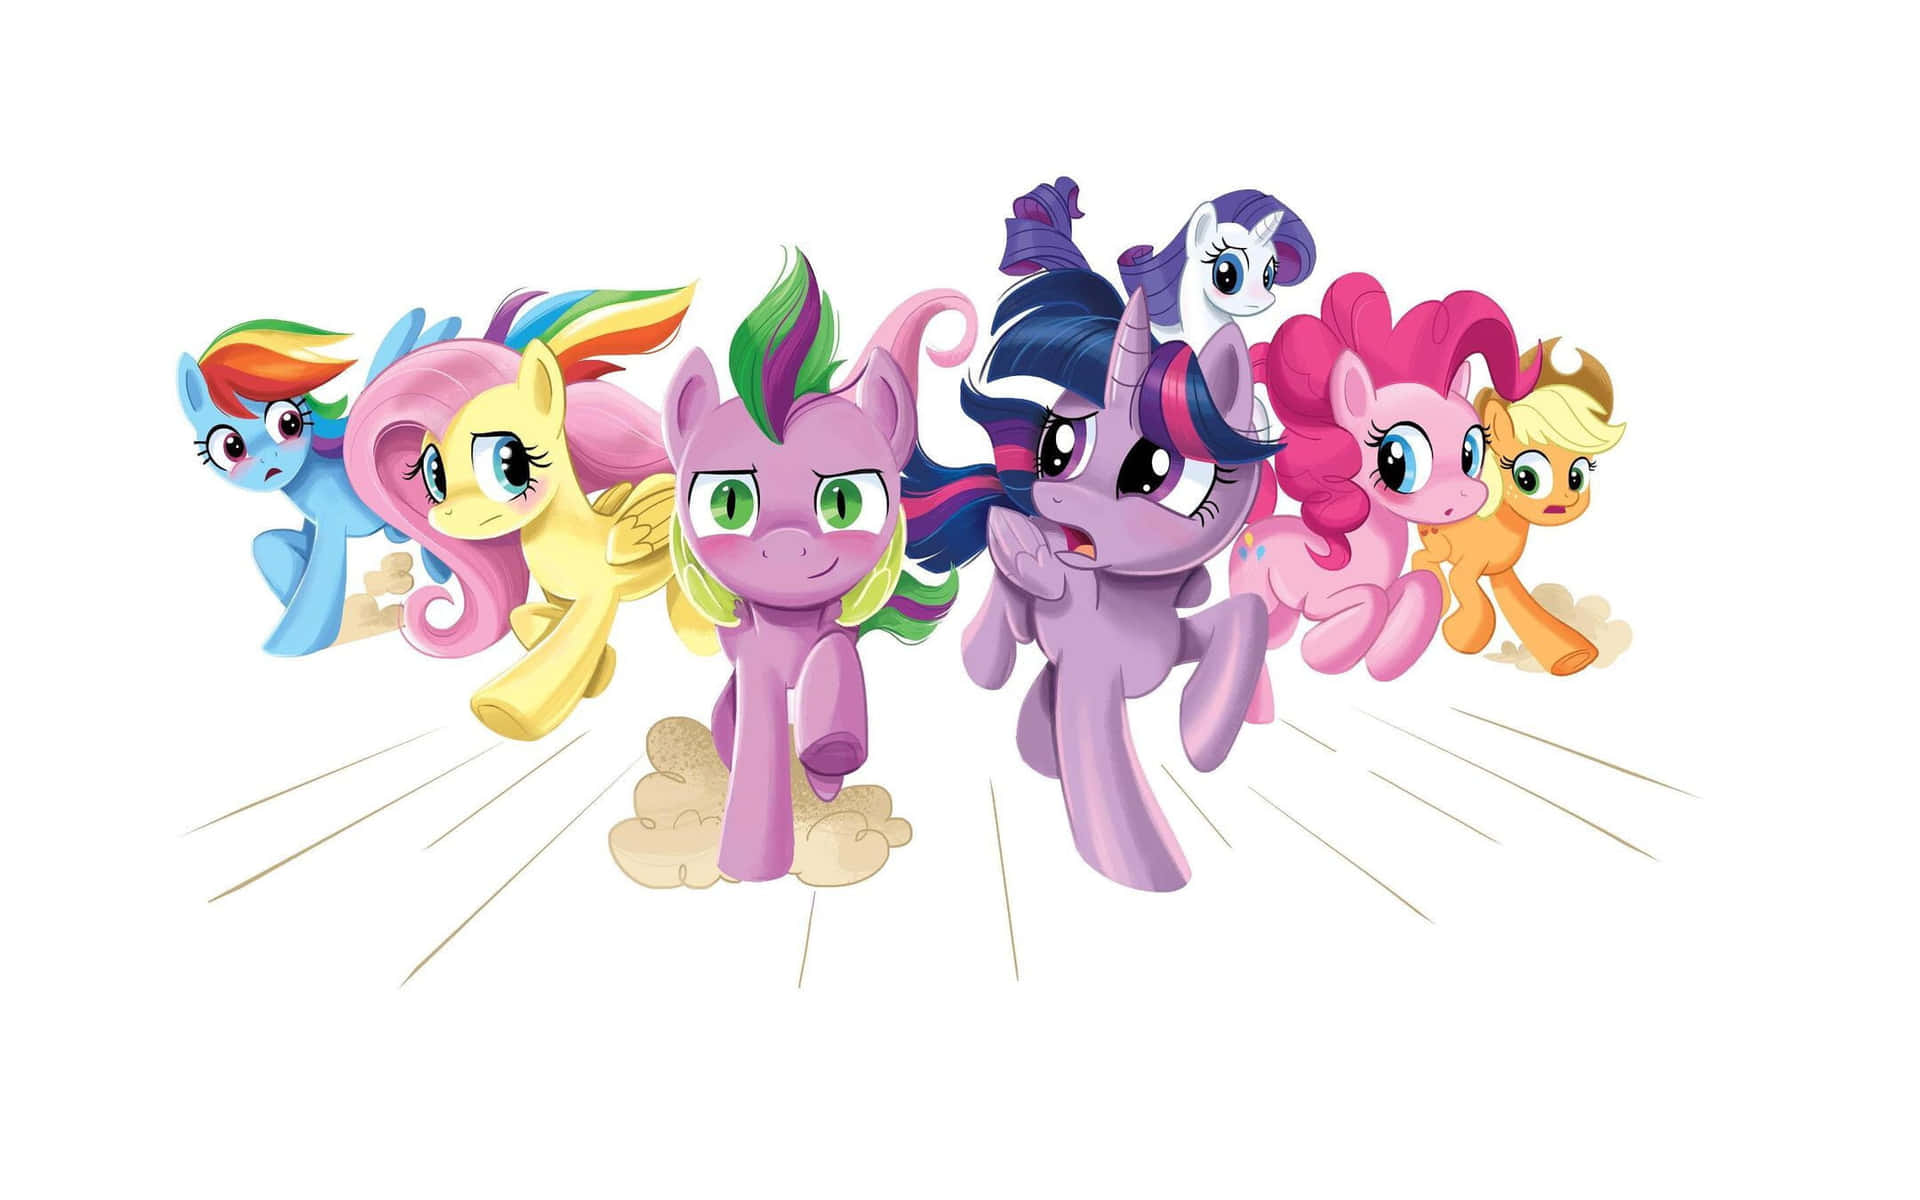 Download My Little Pony Friendship is Magic | Wallpapers.com